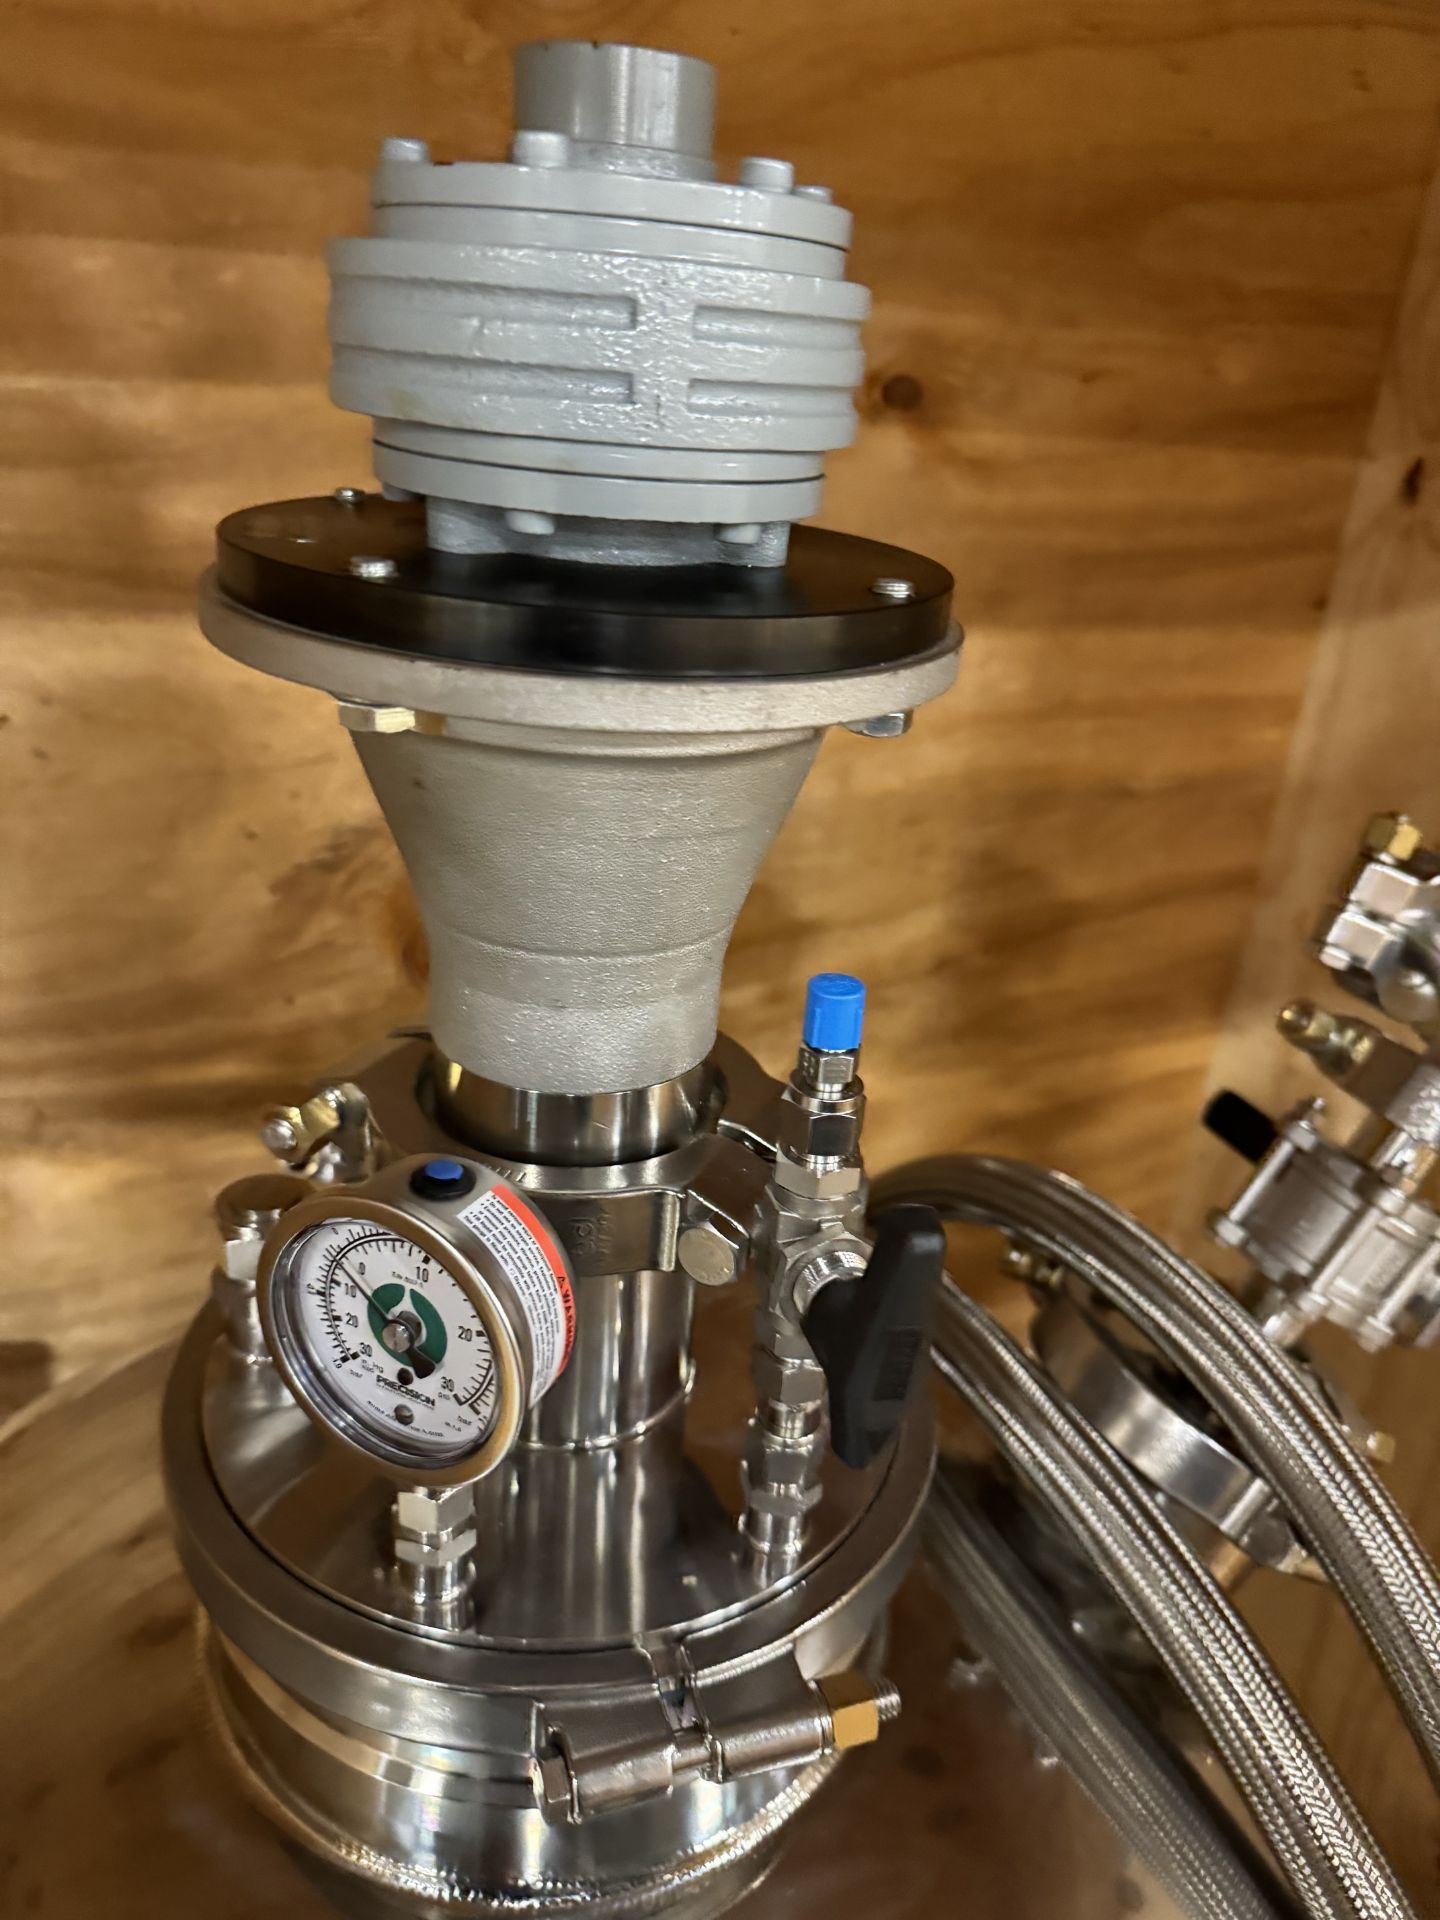 New/Unused Precision Extraction Solutions 100 L Multi-Use Reactor Vessel. Model RV-100. - Image 6 of 7